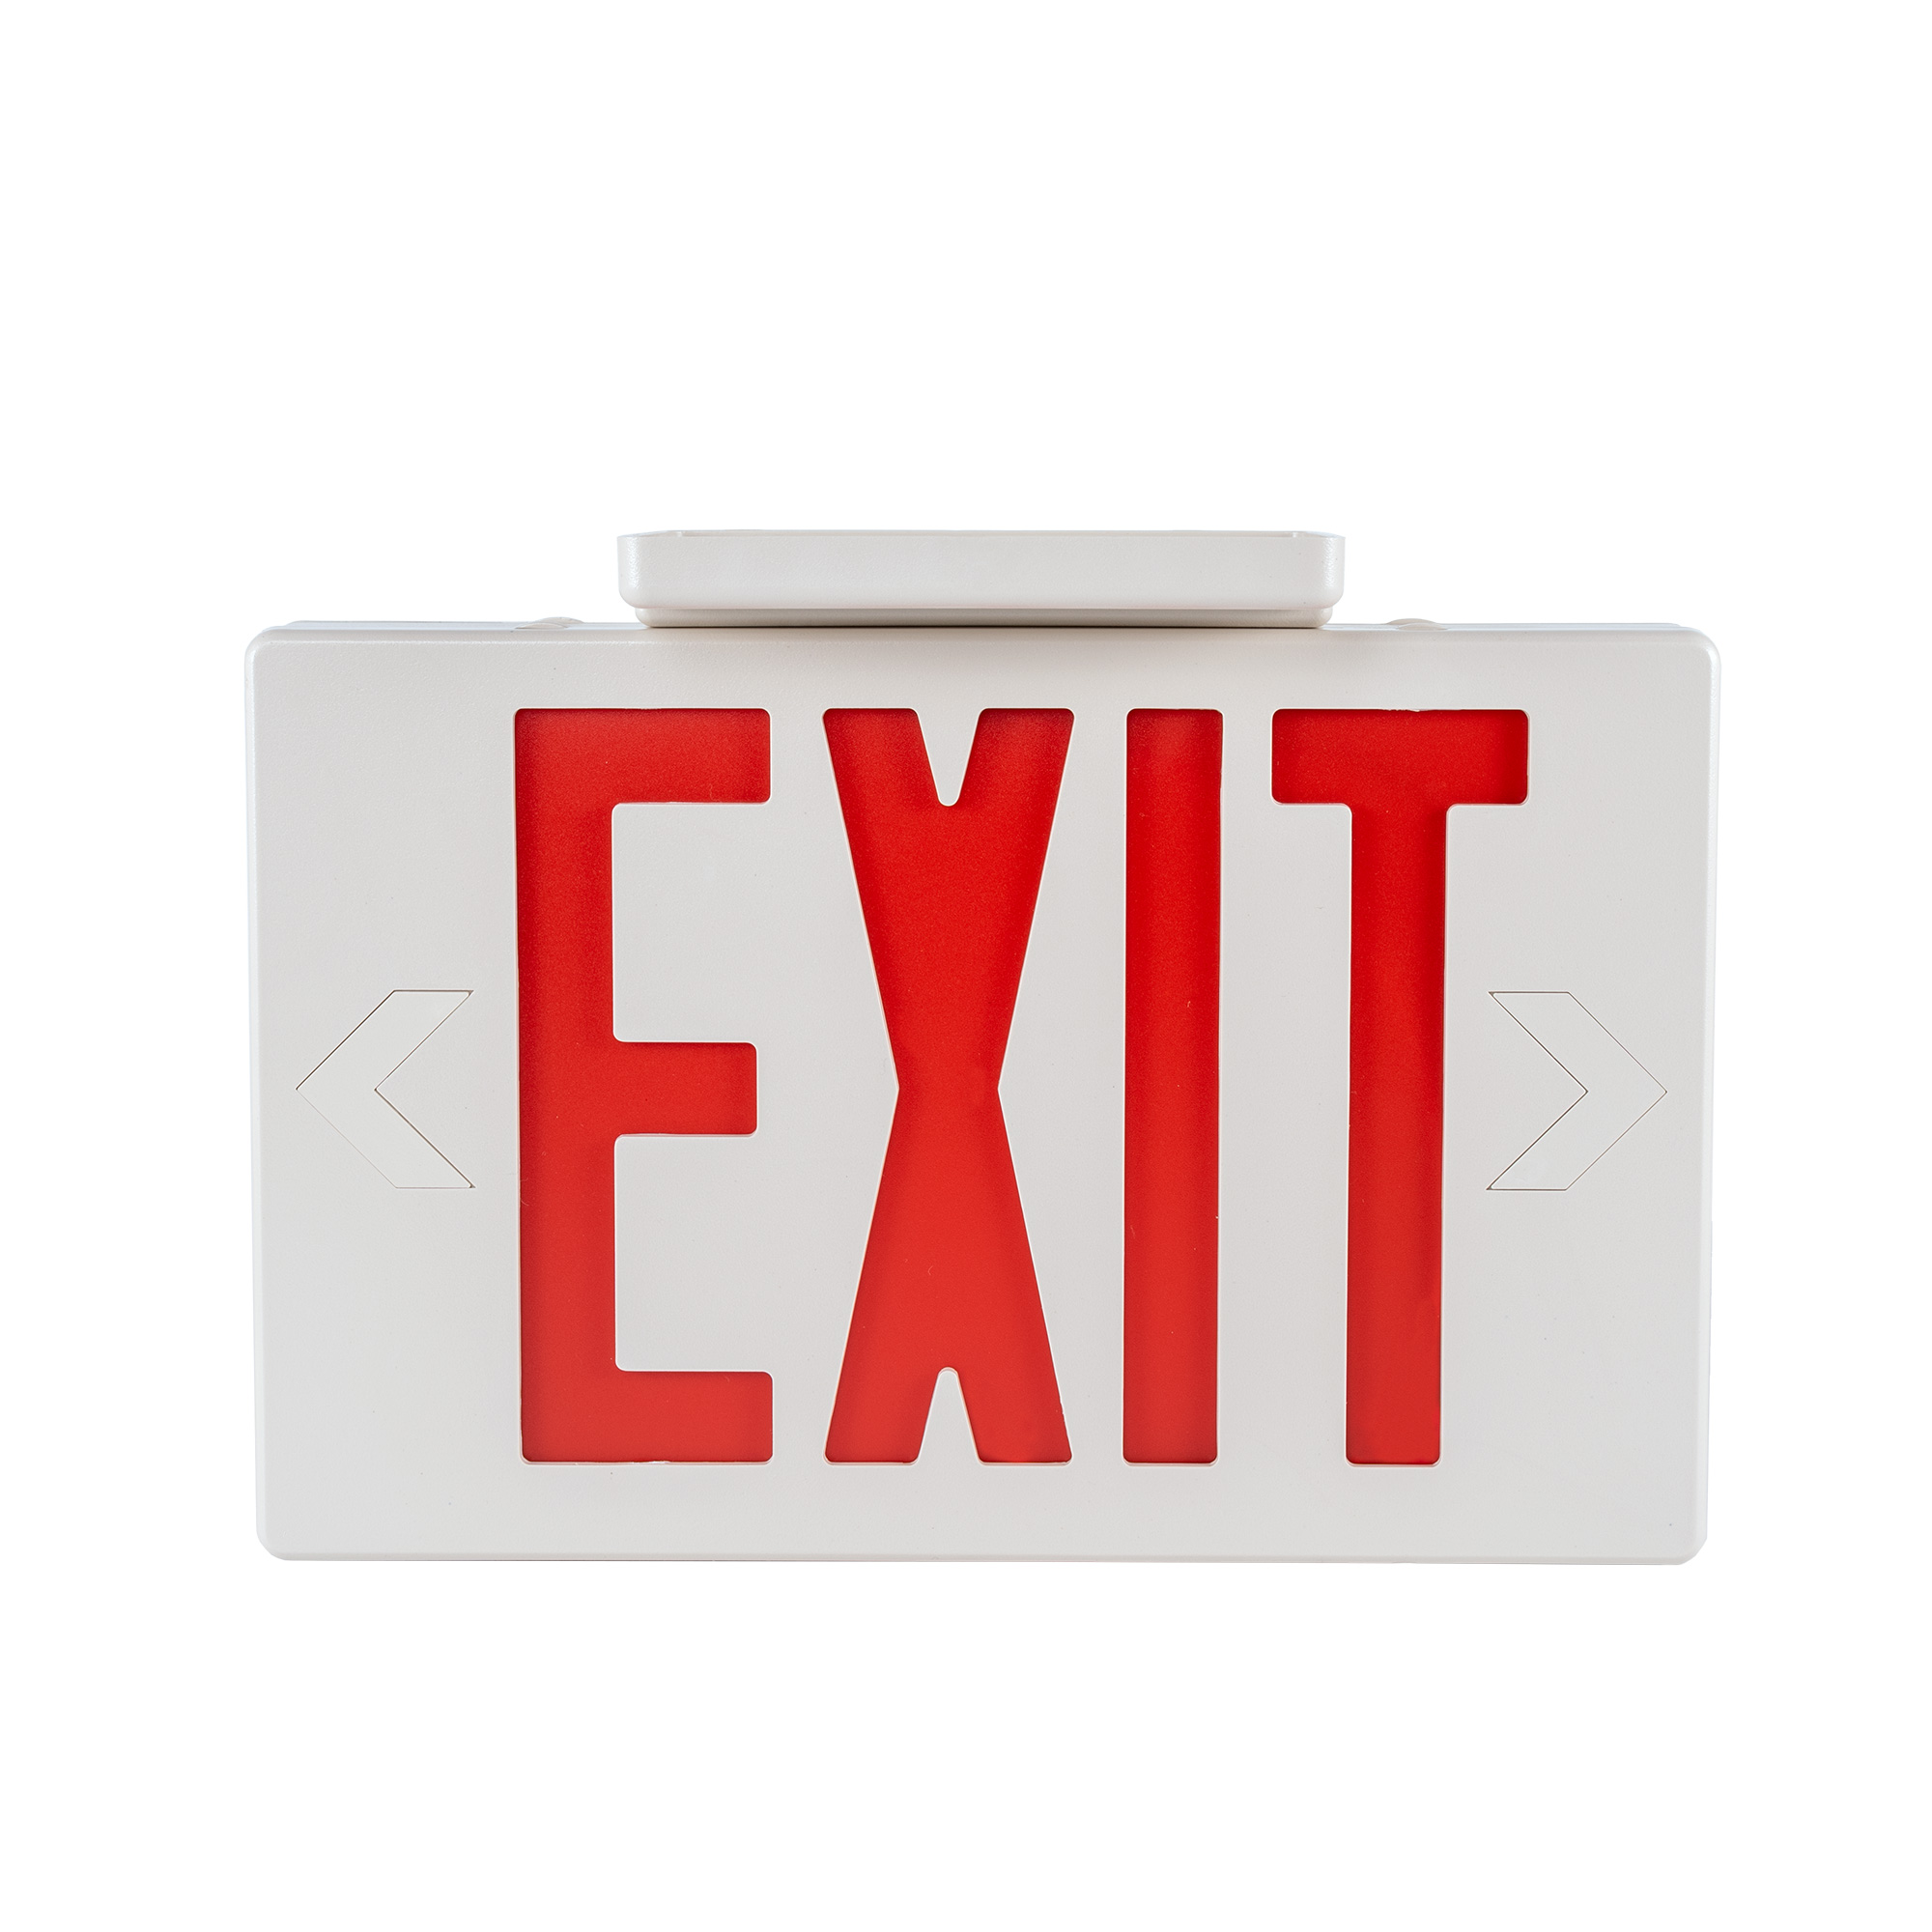 Gruenlich LED Emergency EXIT Sign with Double Face and Back Up Batteries- US Standard Red Letter Exit Lighting, UL 924 Qualified, 120-277 Voltage (1-Pack)